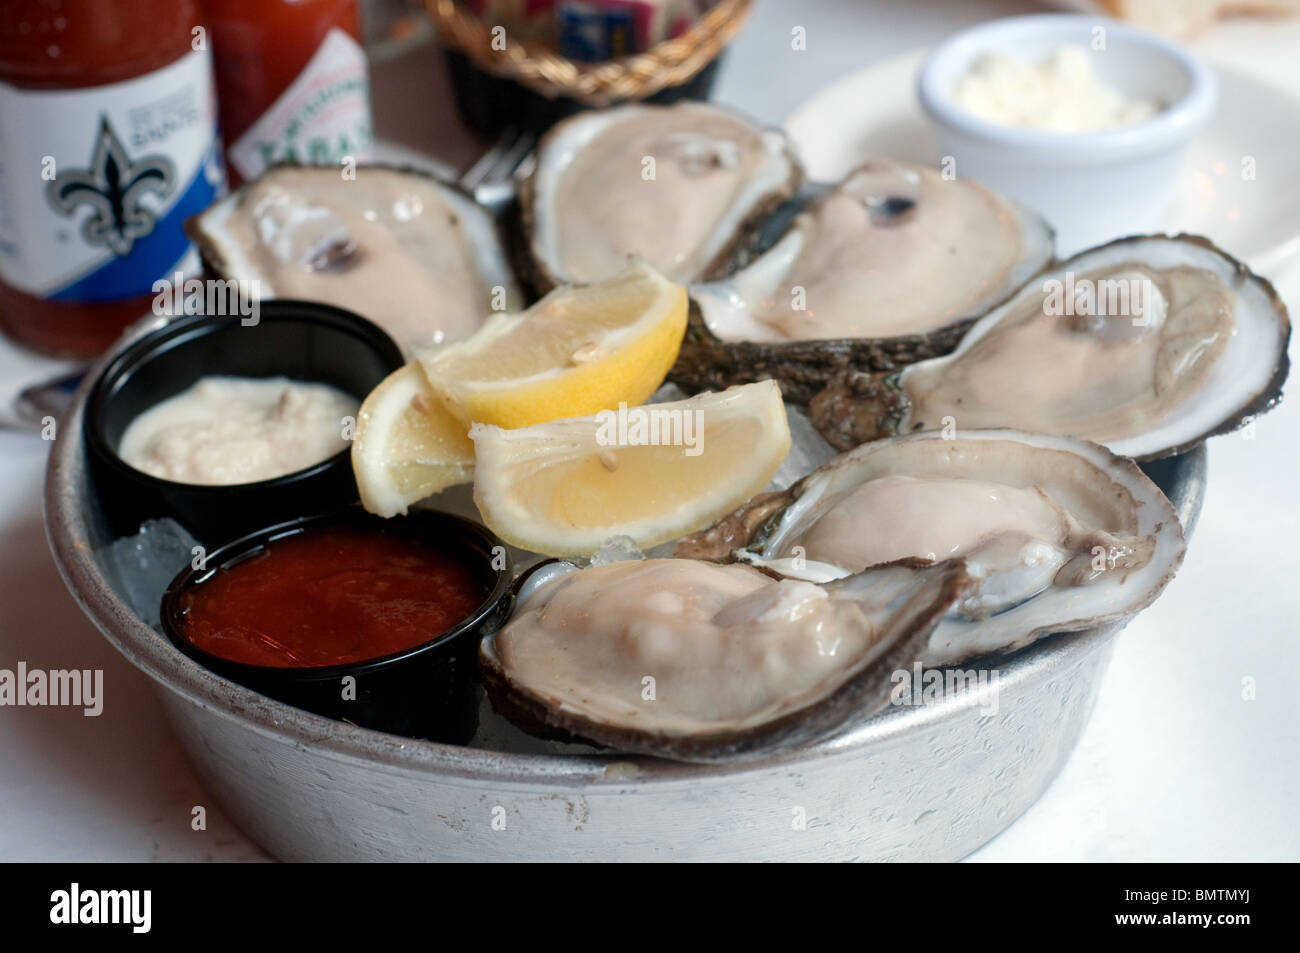 A serving of half a dozen fresh oysters from Dickie Brennan's Bourbon House, a famous restaurant in New Orleans, Louisiana, United States. Stock Photo